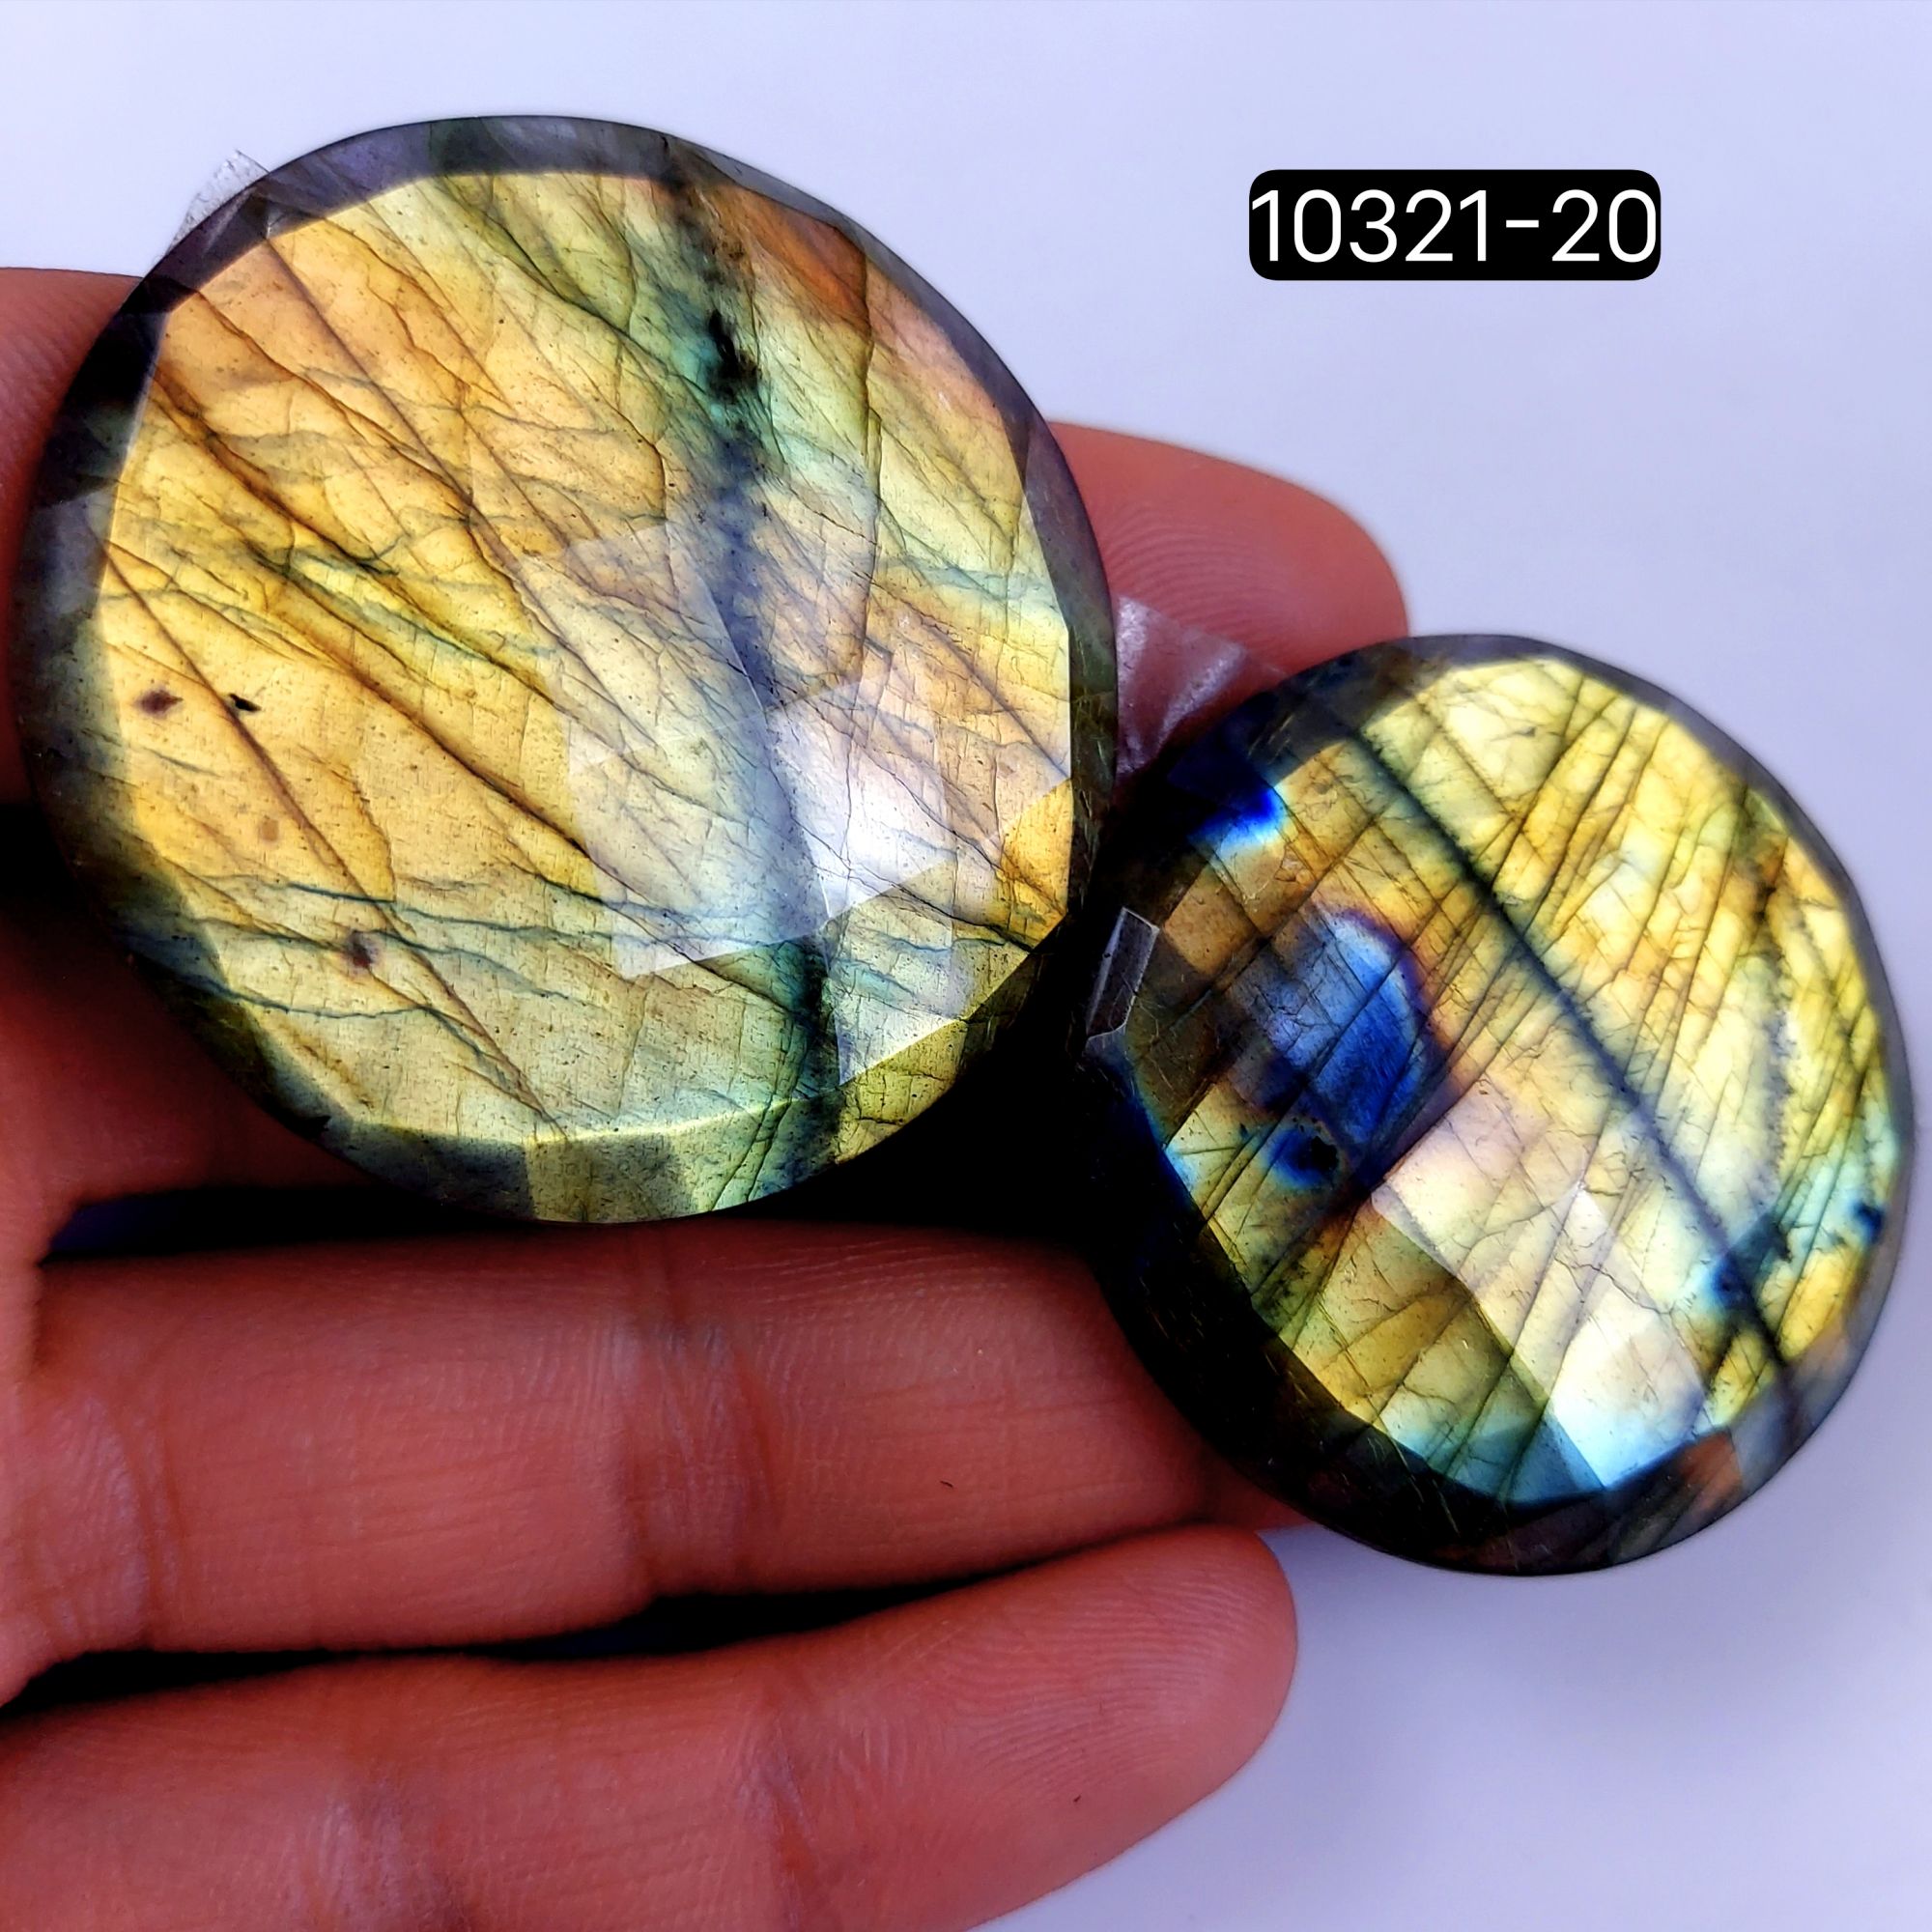 232Cts Natural Labradorite Faceted Cabochon Pair Polished Loose Gemstone Flat Back Multi Jewelry Making Crystal  42x42mm #10321-20